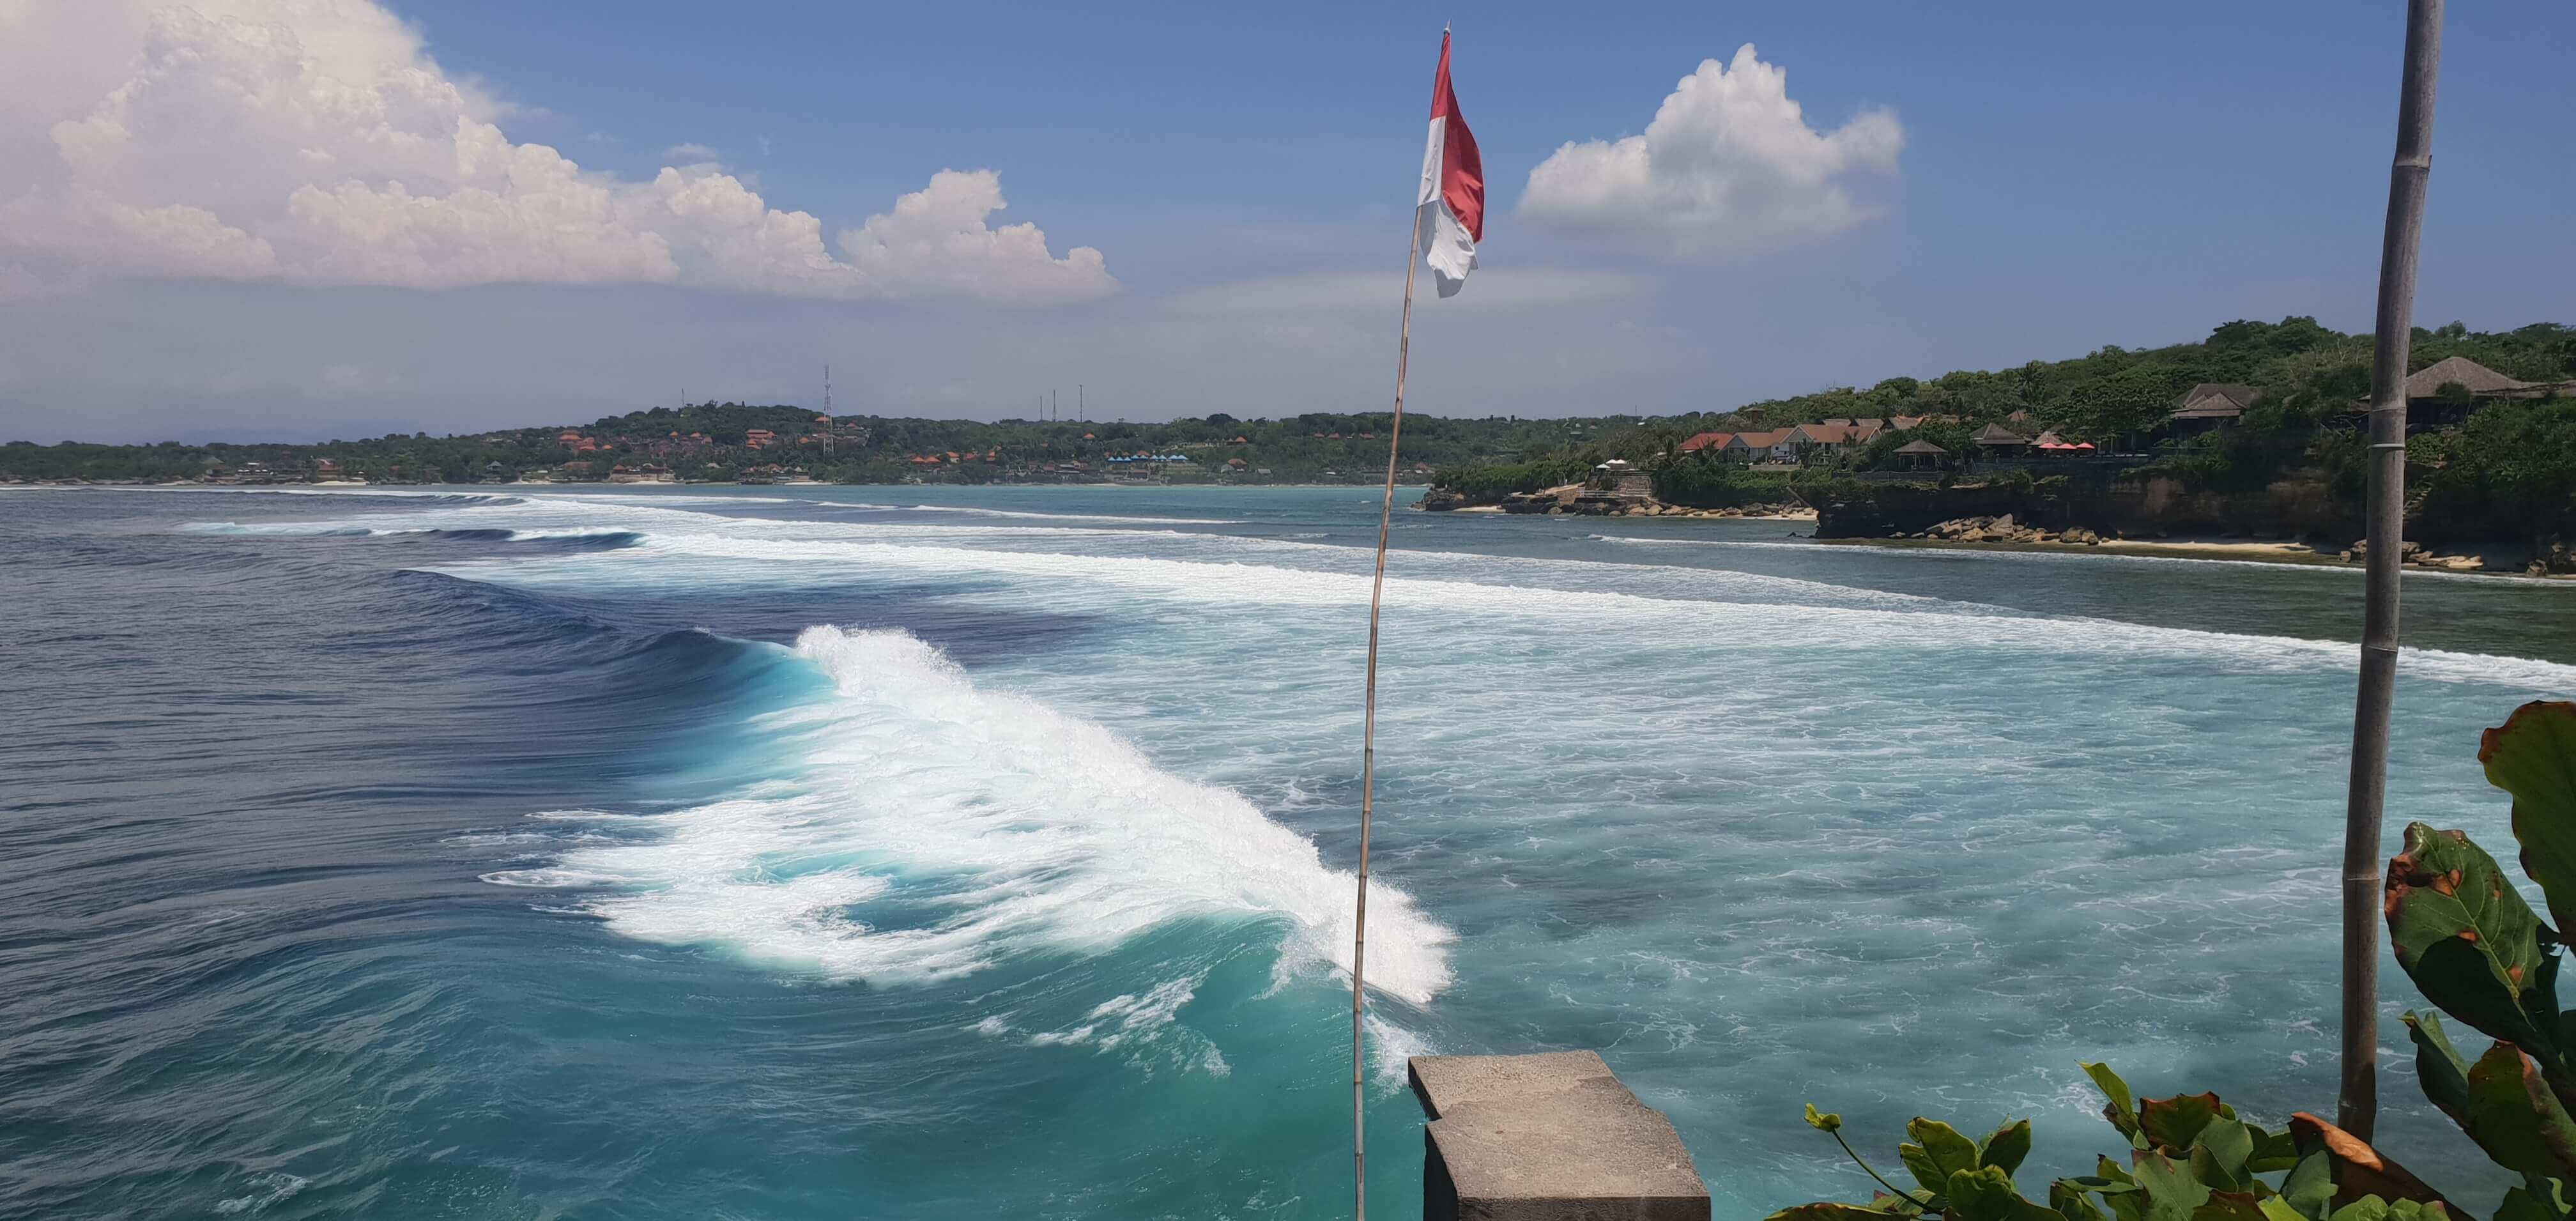 Cliff jumping at Mahana point is one of the most thrilling things to do in Nusa Lembongan